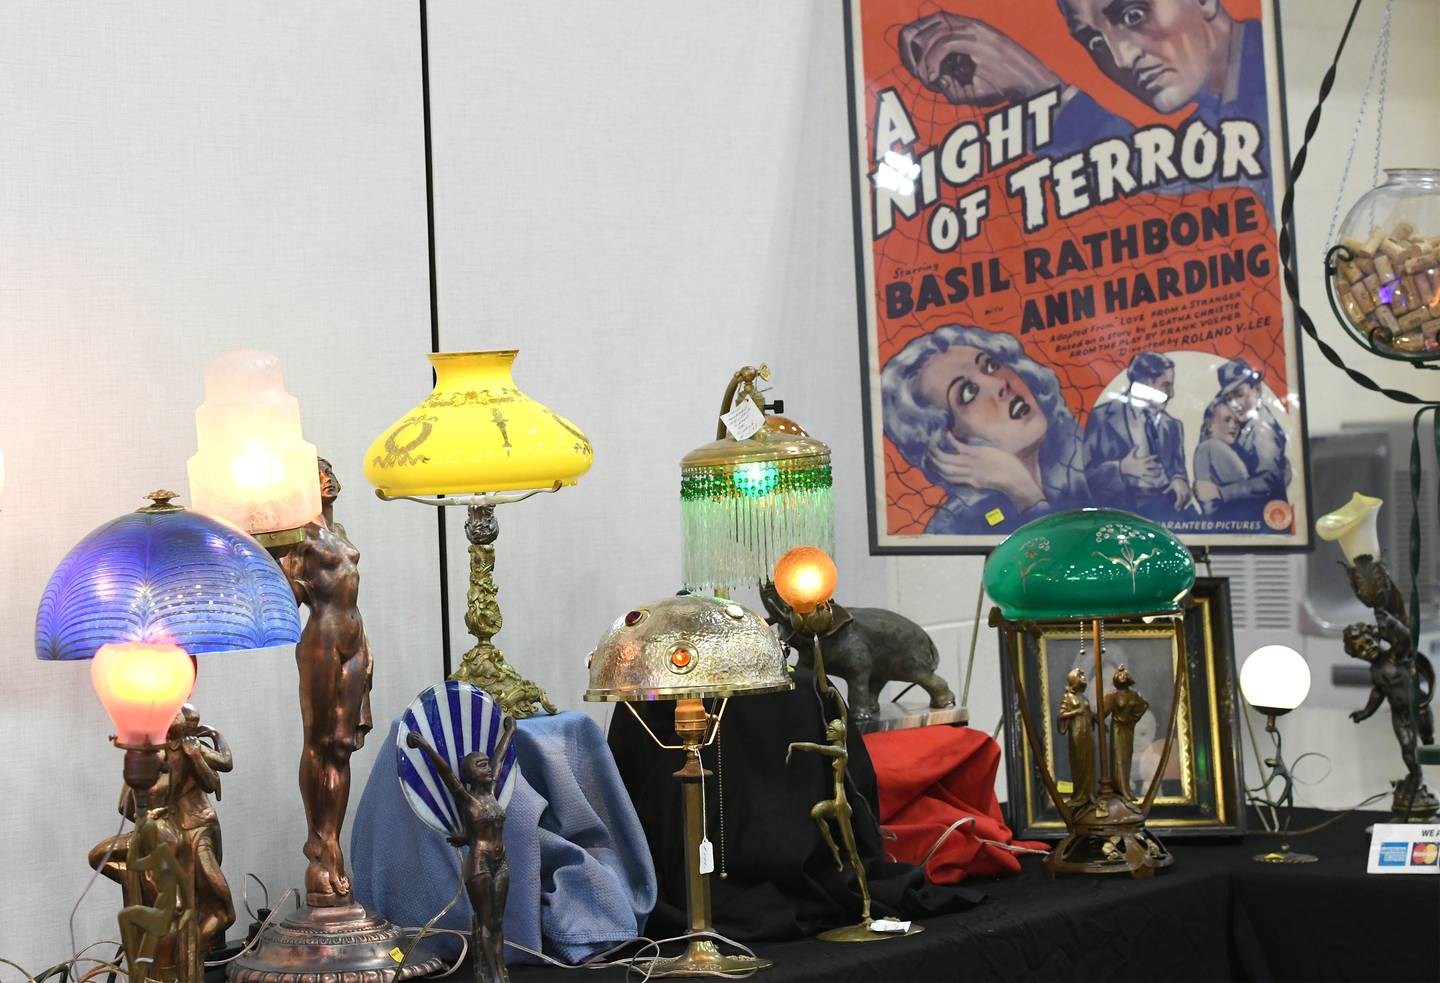 The 'Twisted Whiskers" booth at the Oregon Woman's Club Antique Show featured a selection of art deco and art nouveau lamps. The shop is located in Raymond, Illinois near Springfield.